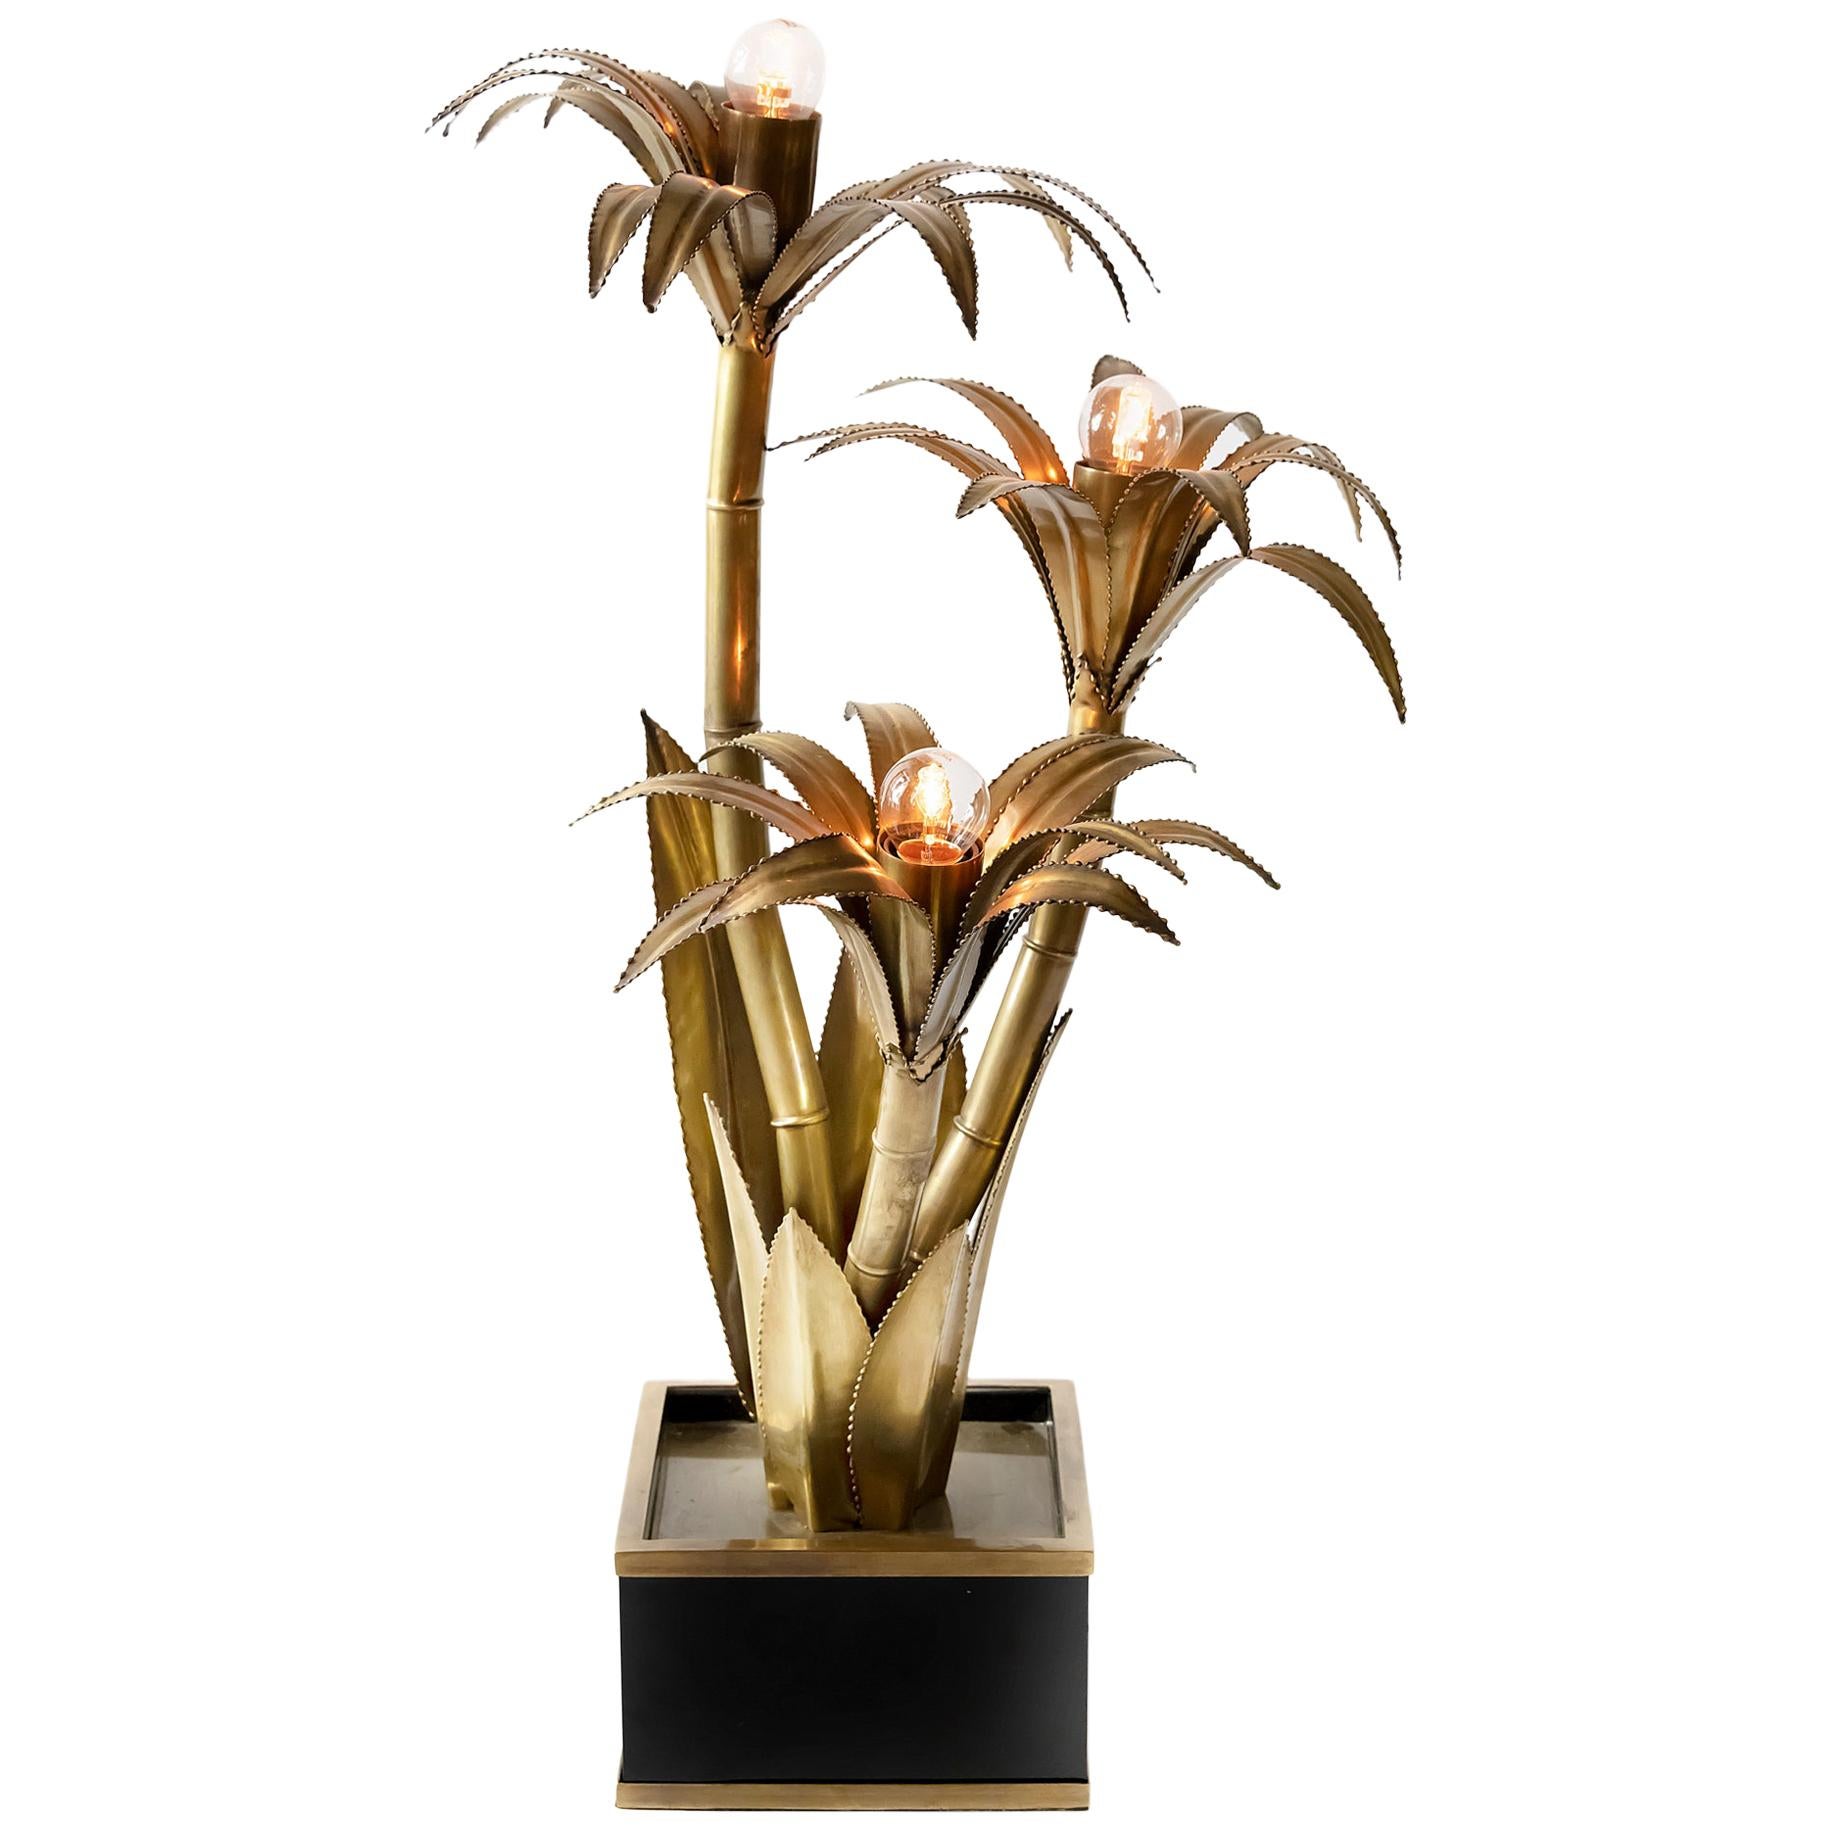 Vintage French Brass Table Lamp with Palm Figures created by Maison Jansen